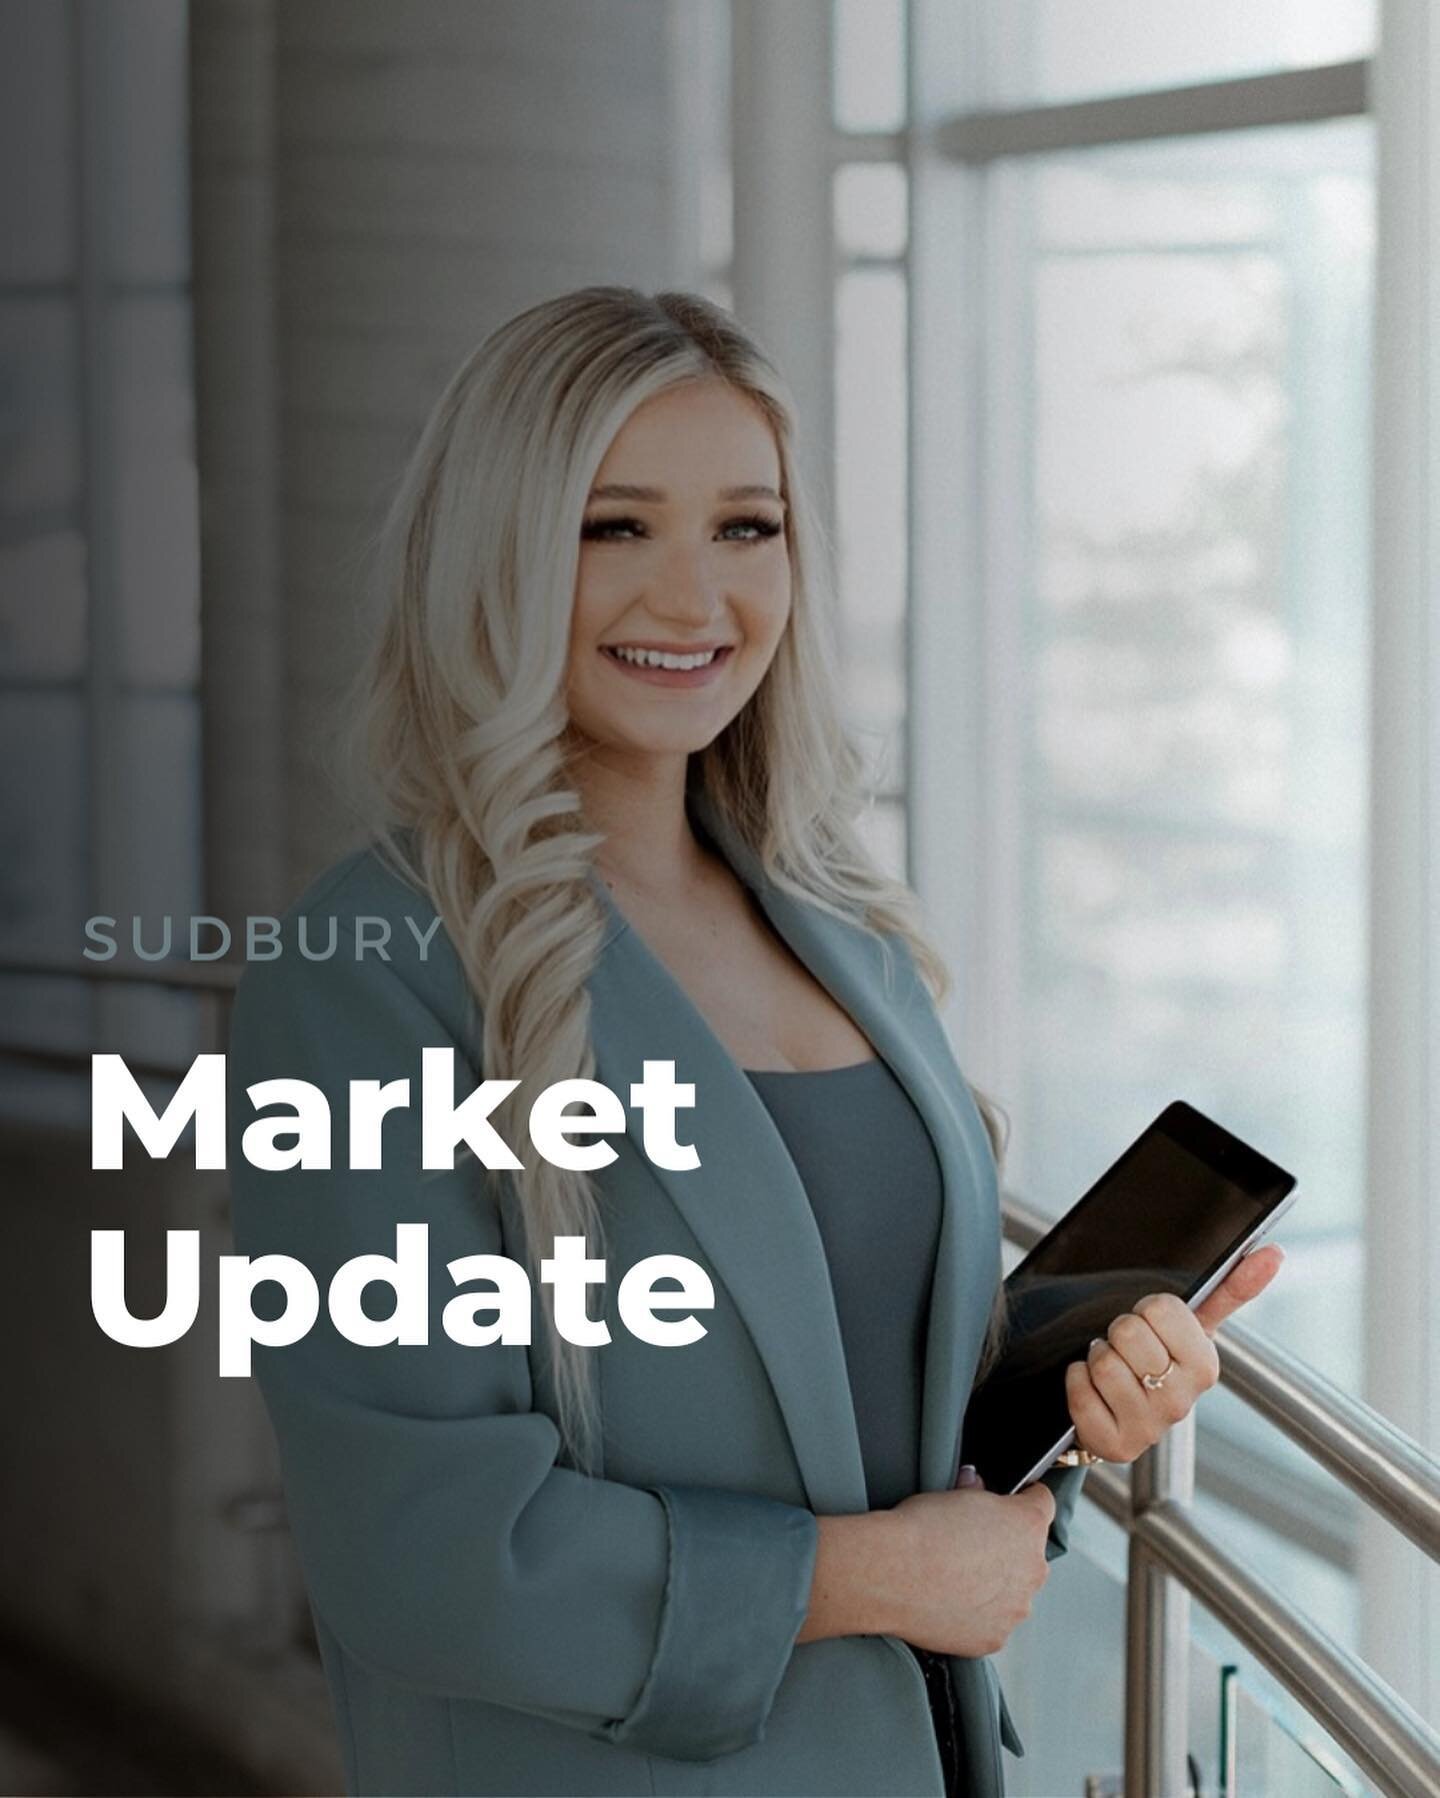 The market is shifting&hellip; again 👩🏼&zwj;💻

The housing market is showing signs of buyer confidence and low inventory. The average purchase price is back on the incline, days on market is shortening compared to last month and sellers obtaining 